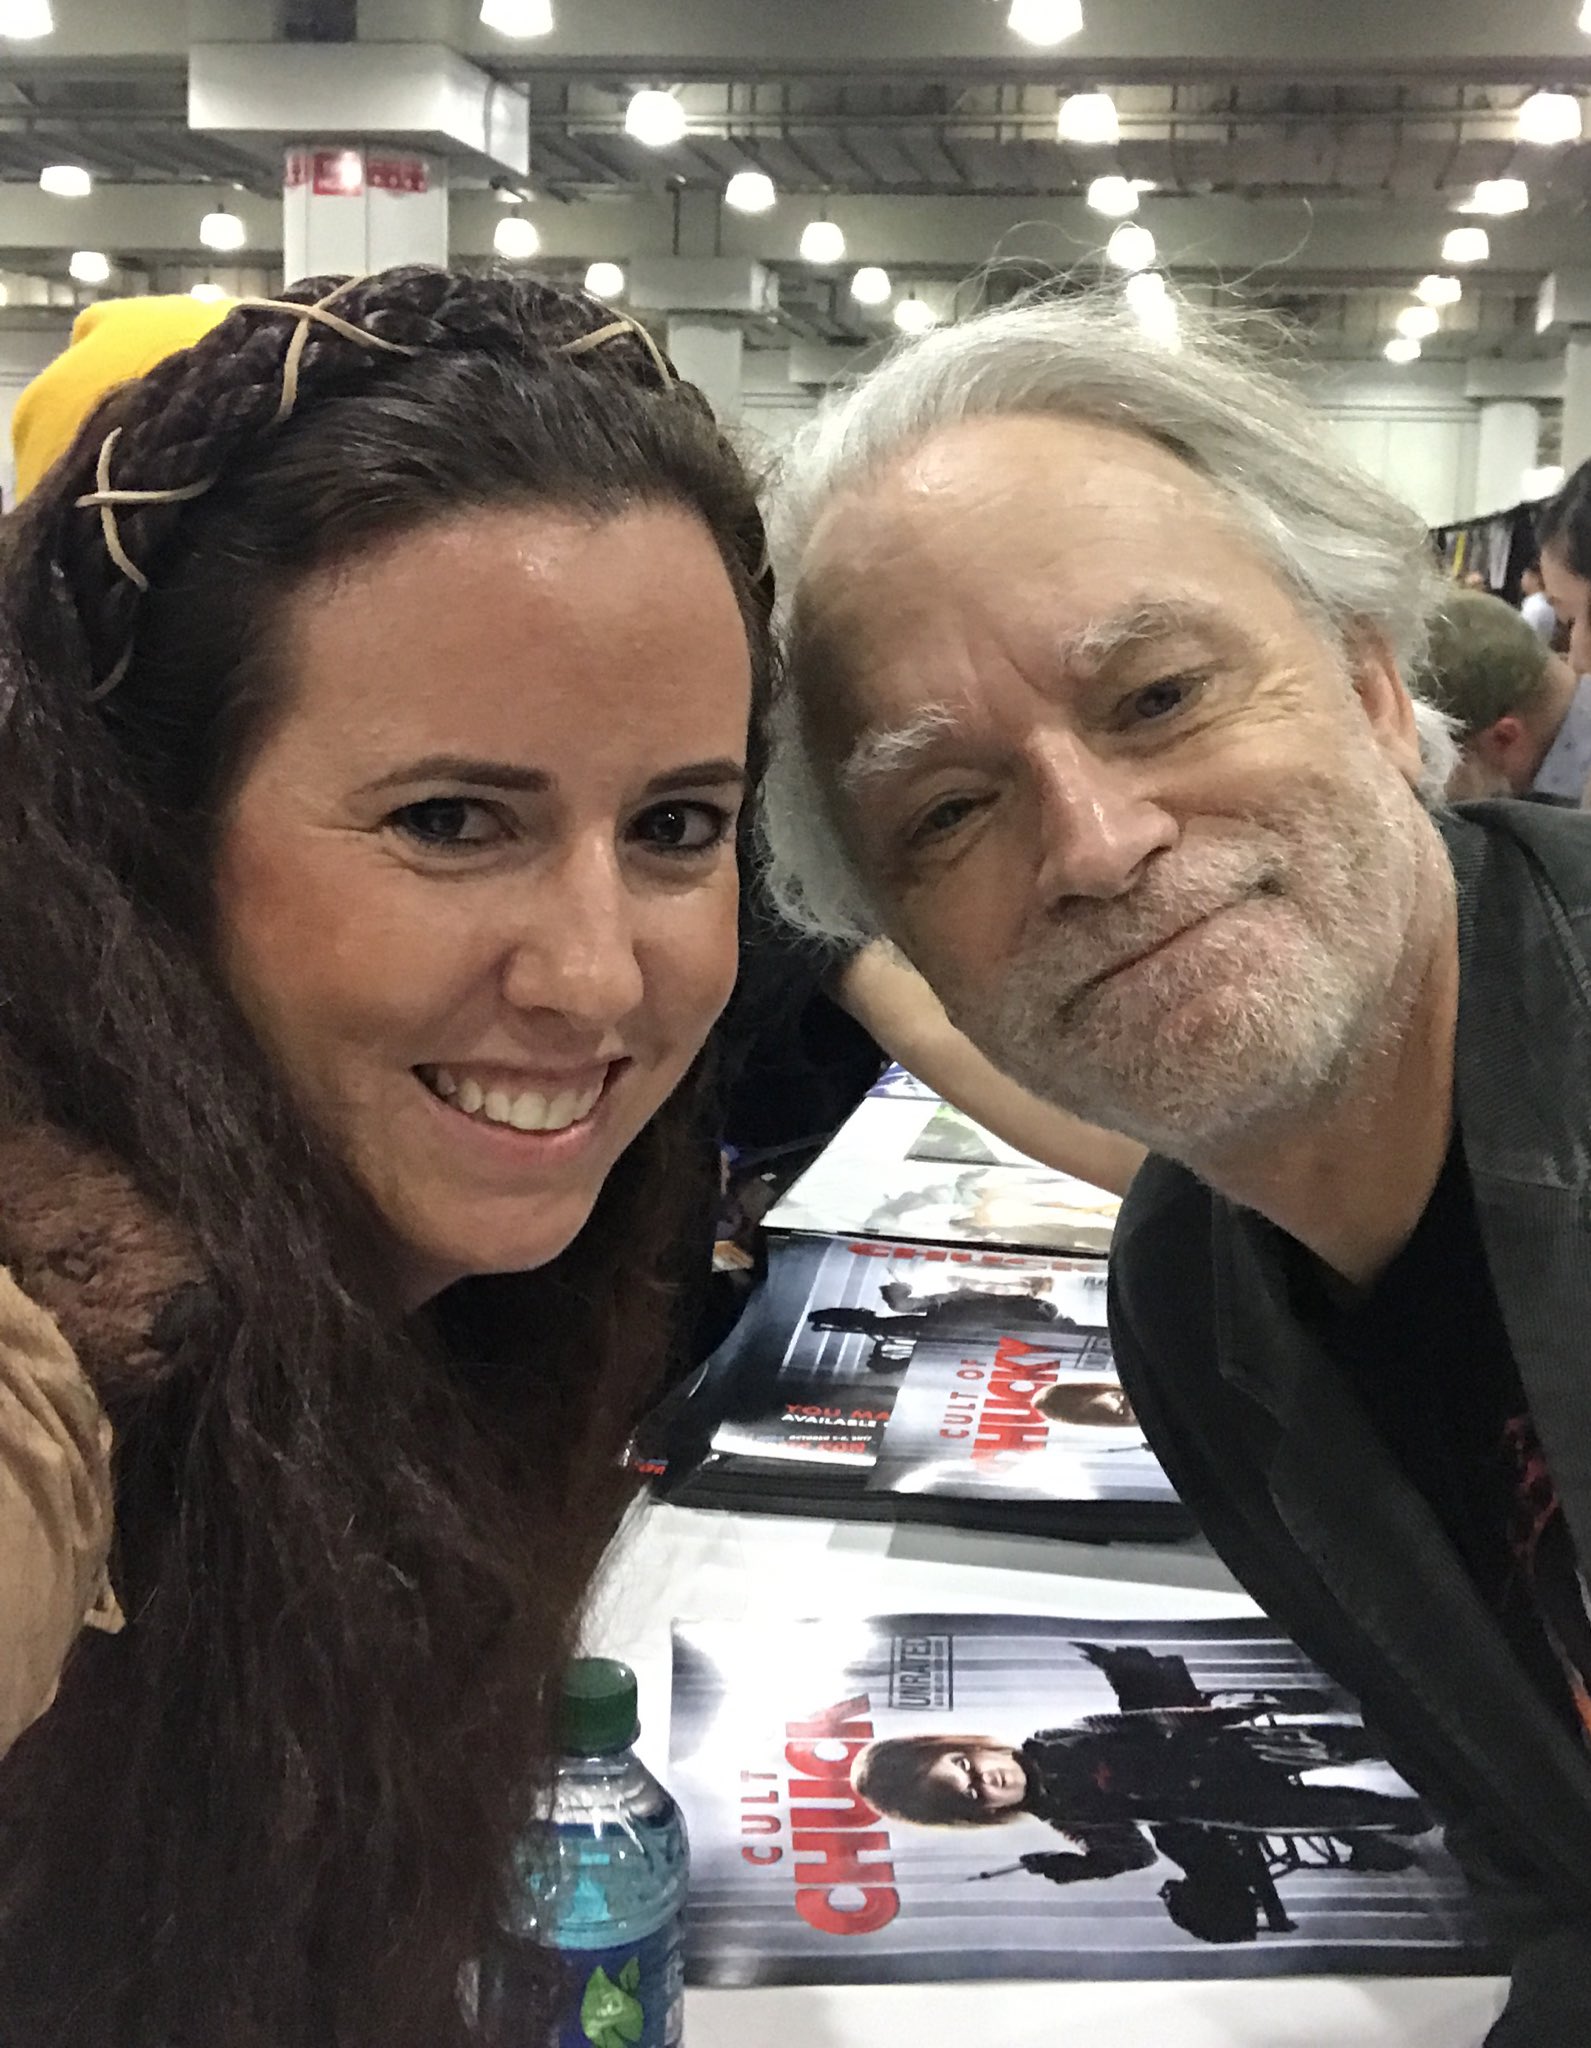 Happy Birthday to Brad Dourif!! This was an epic day 